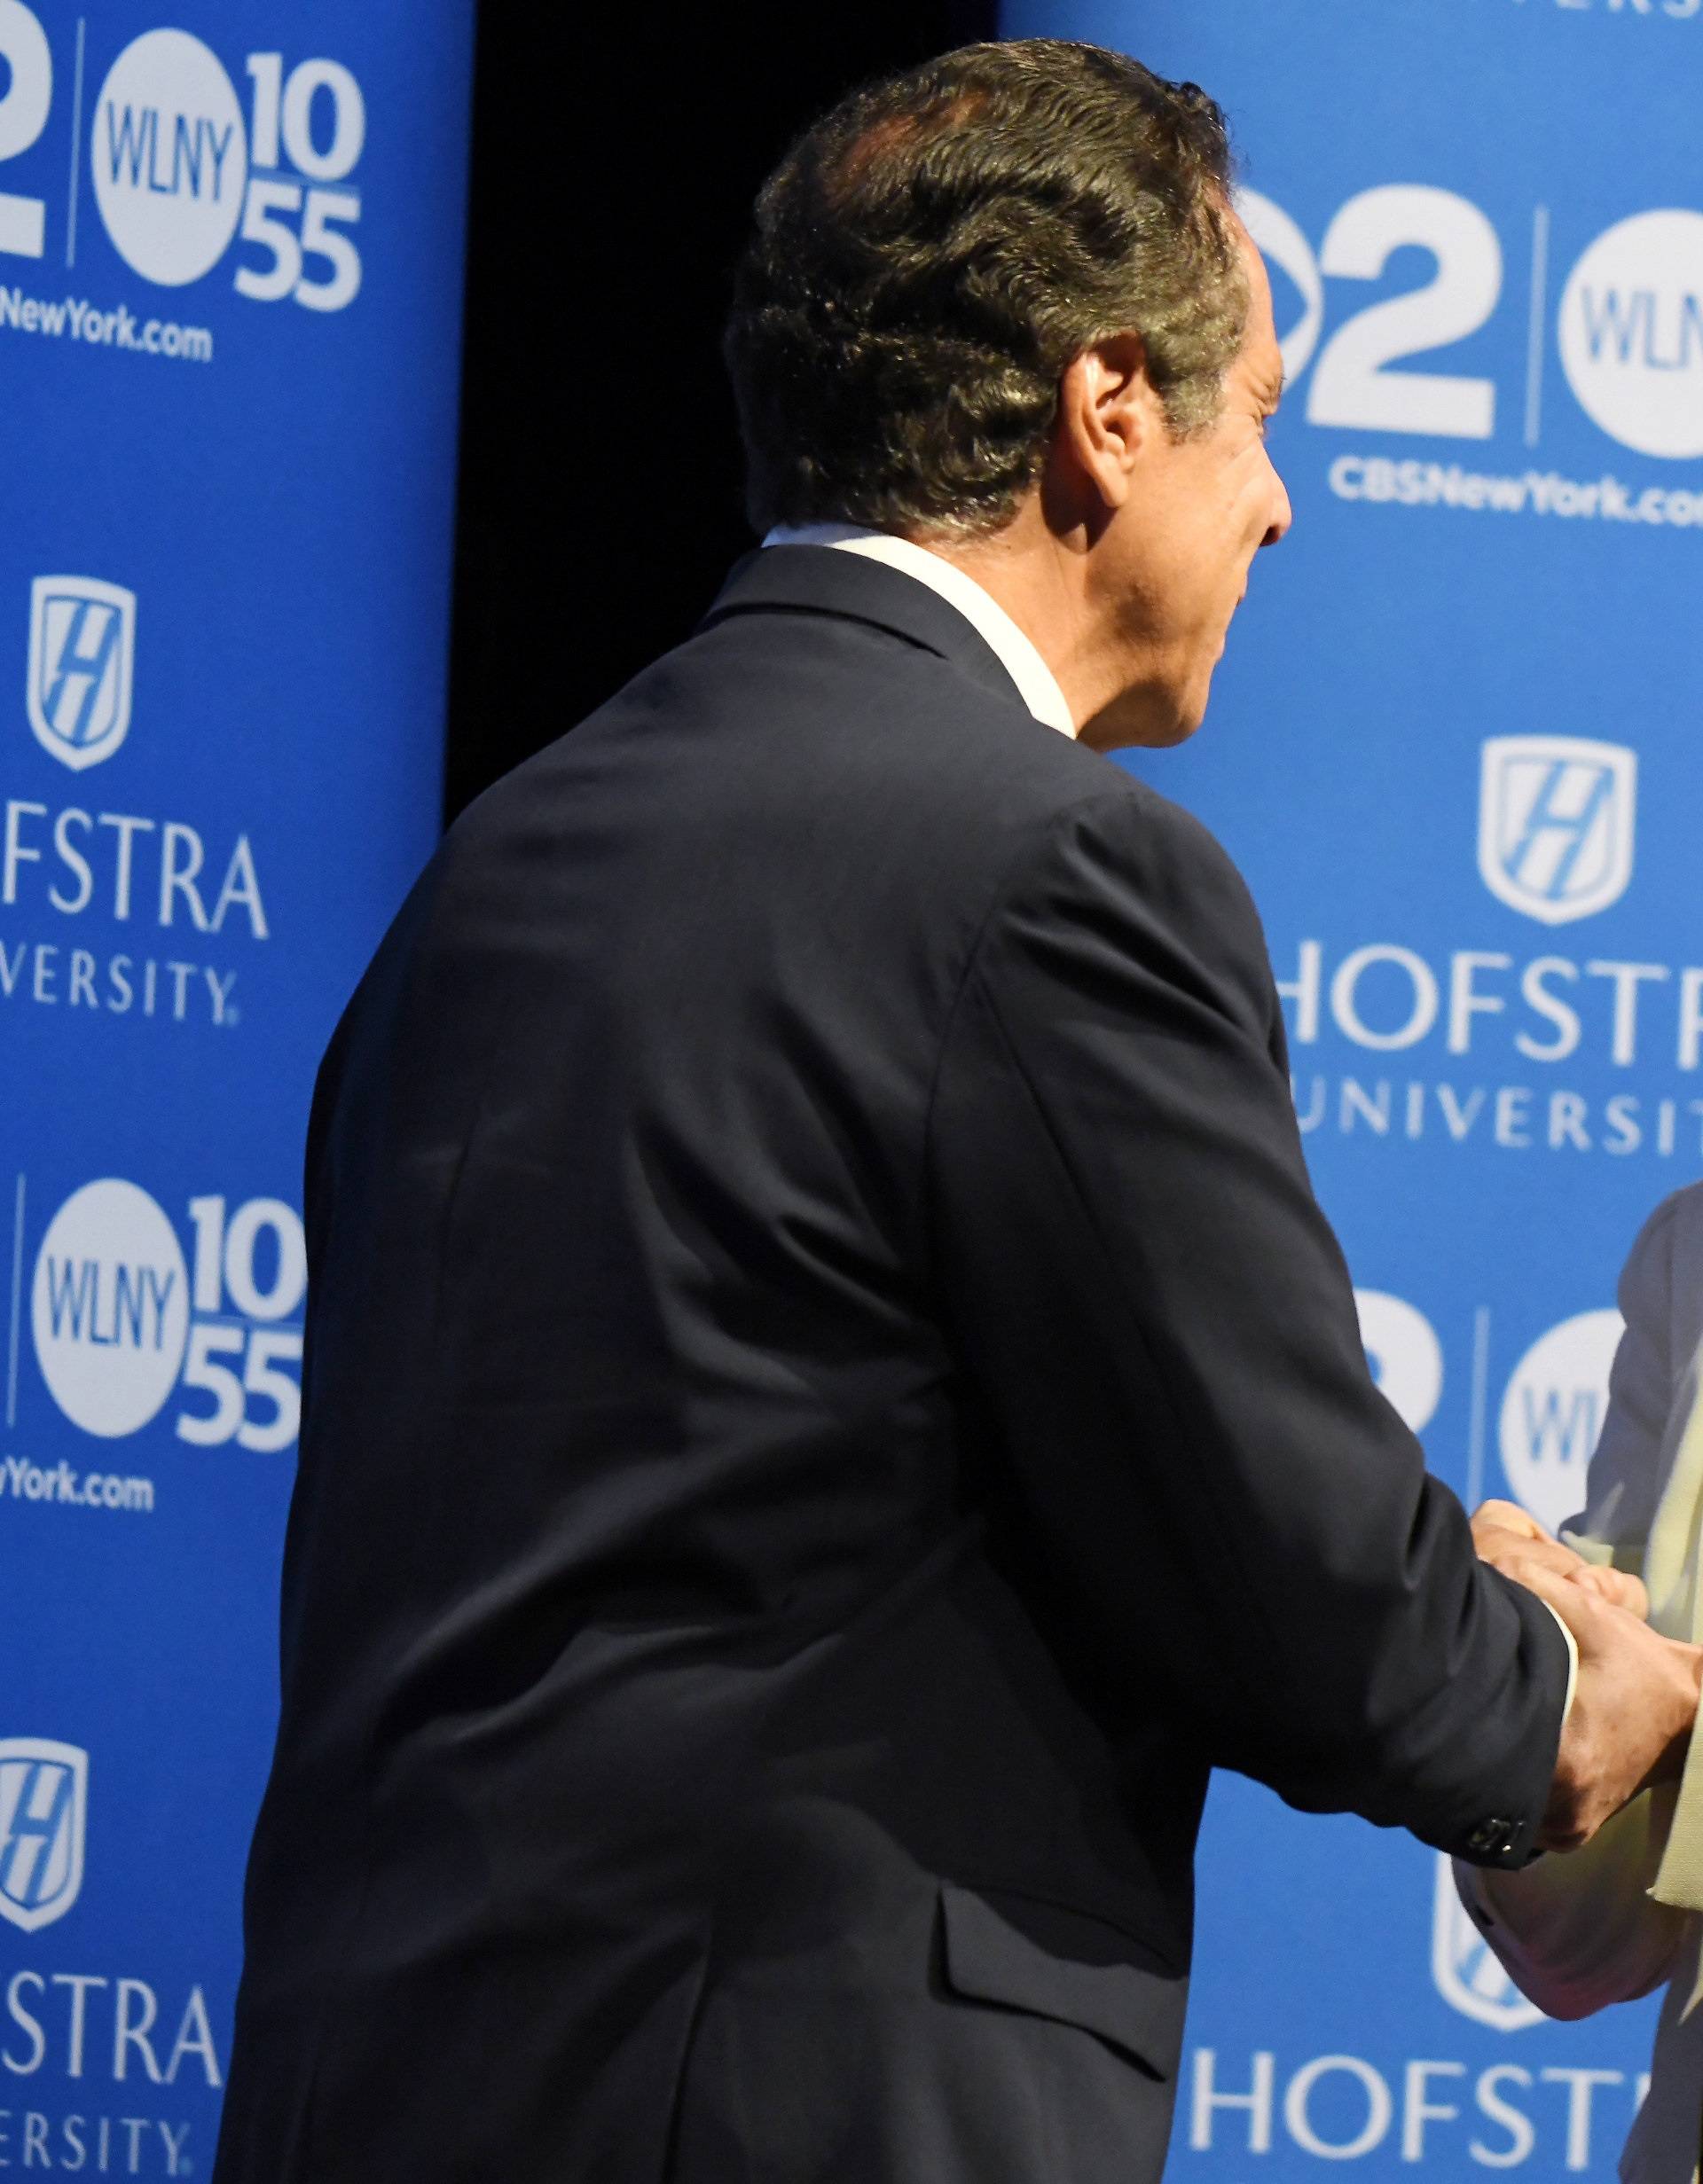 Governor Andrew M. Cuomo shakes hand with Cynthia Nixon prior to the Democratic gubernatorial primary debate at Hofstra University in Hempstead